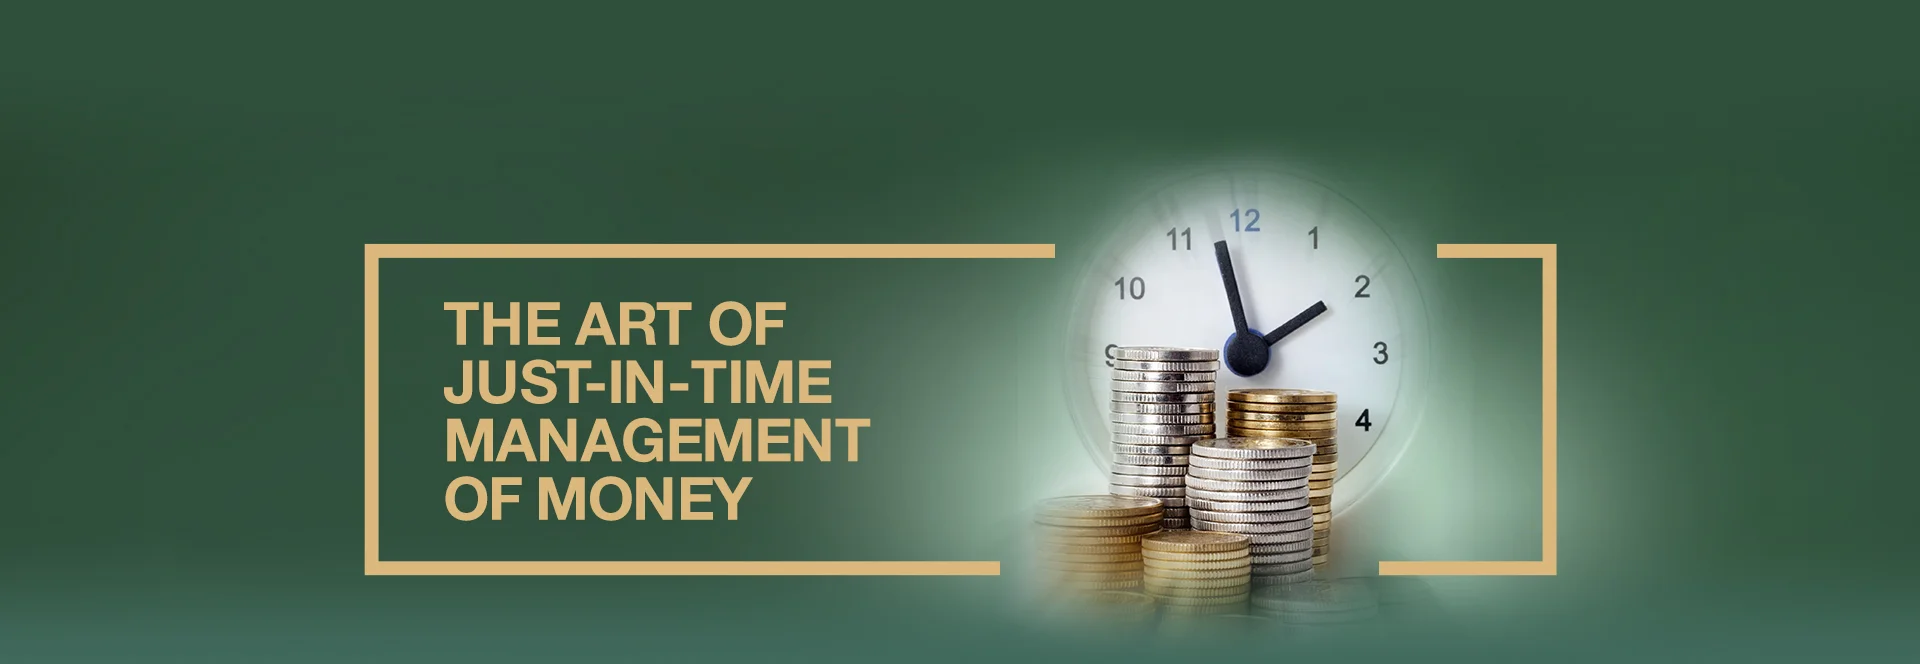 The Art Of Just-In-Time Management Of Money